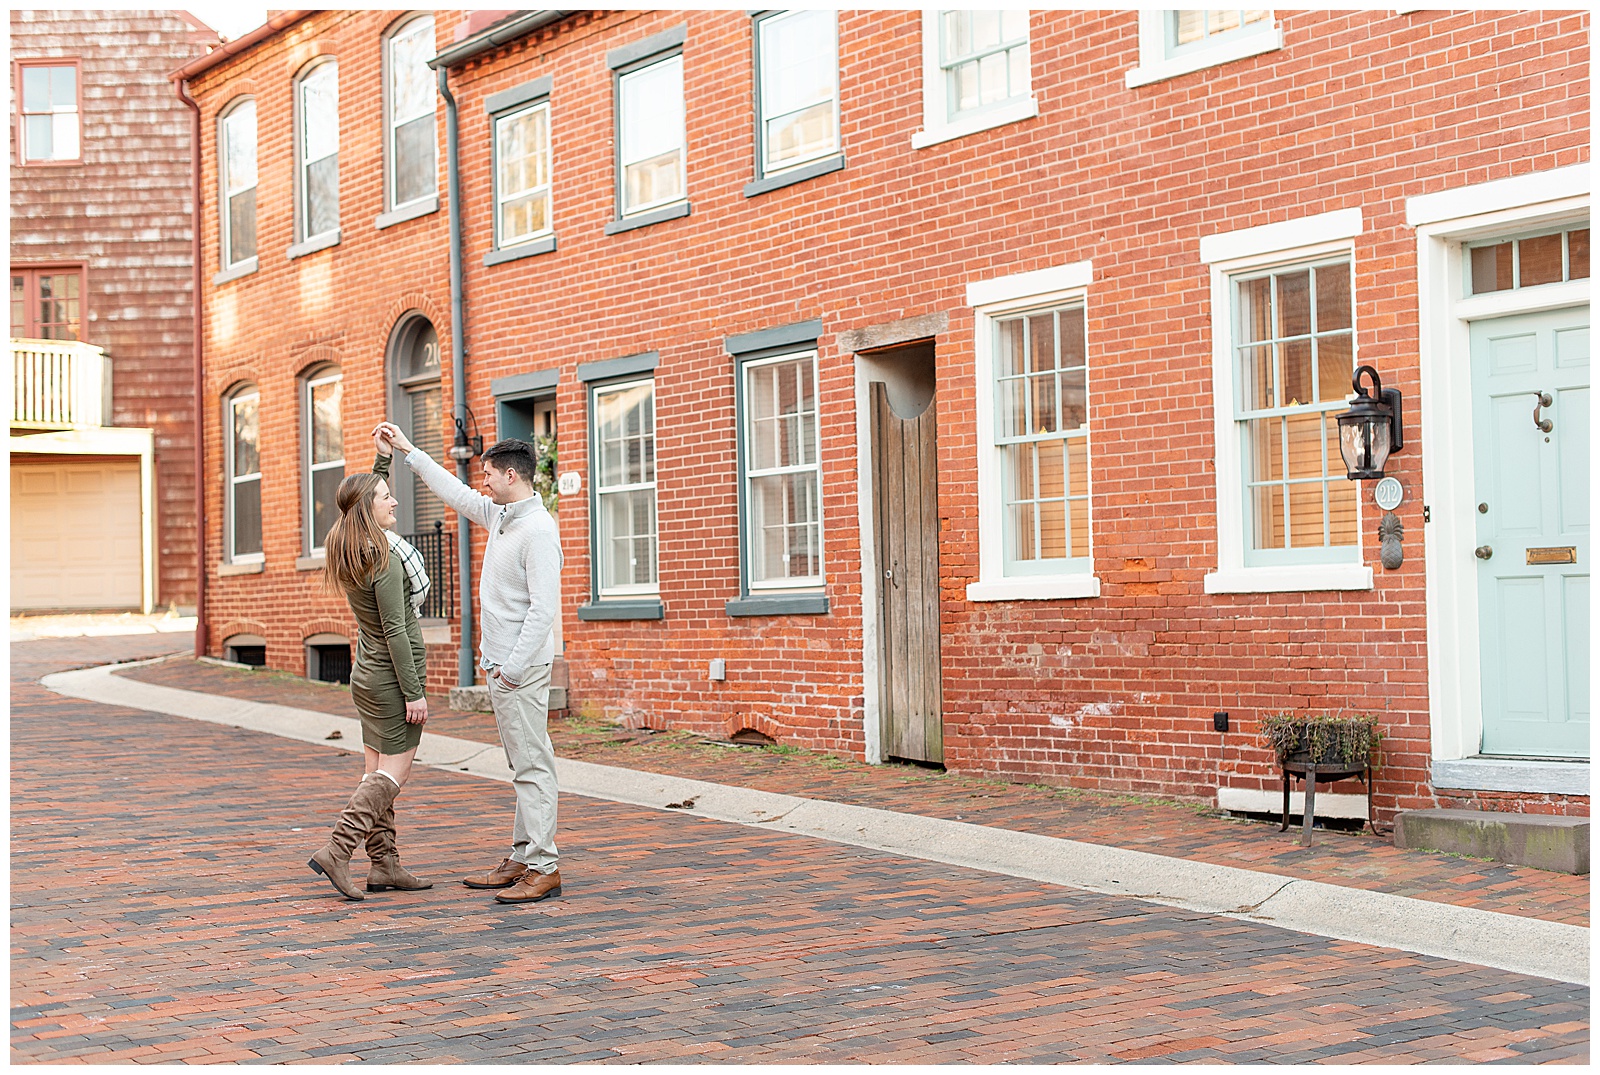 couple twirling in middle of cobblestone road with brick buildings on either side